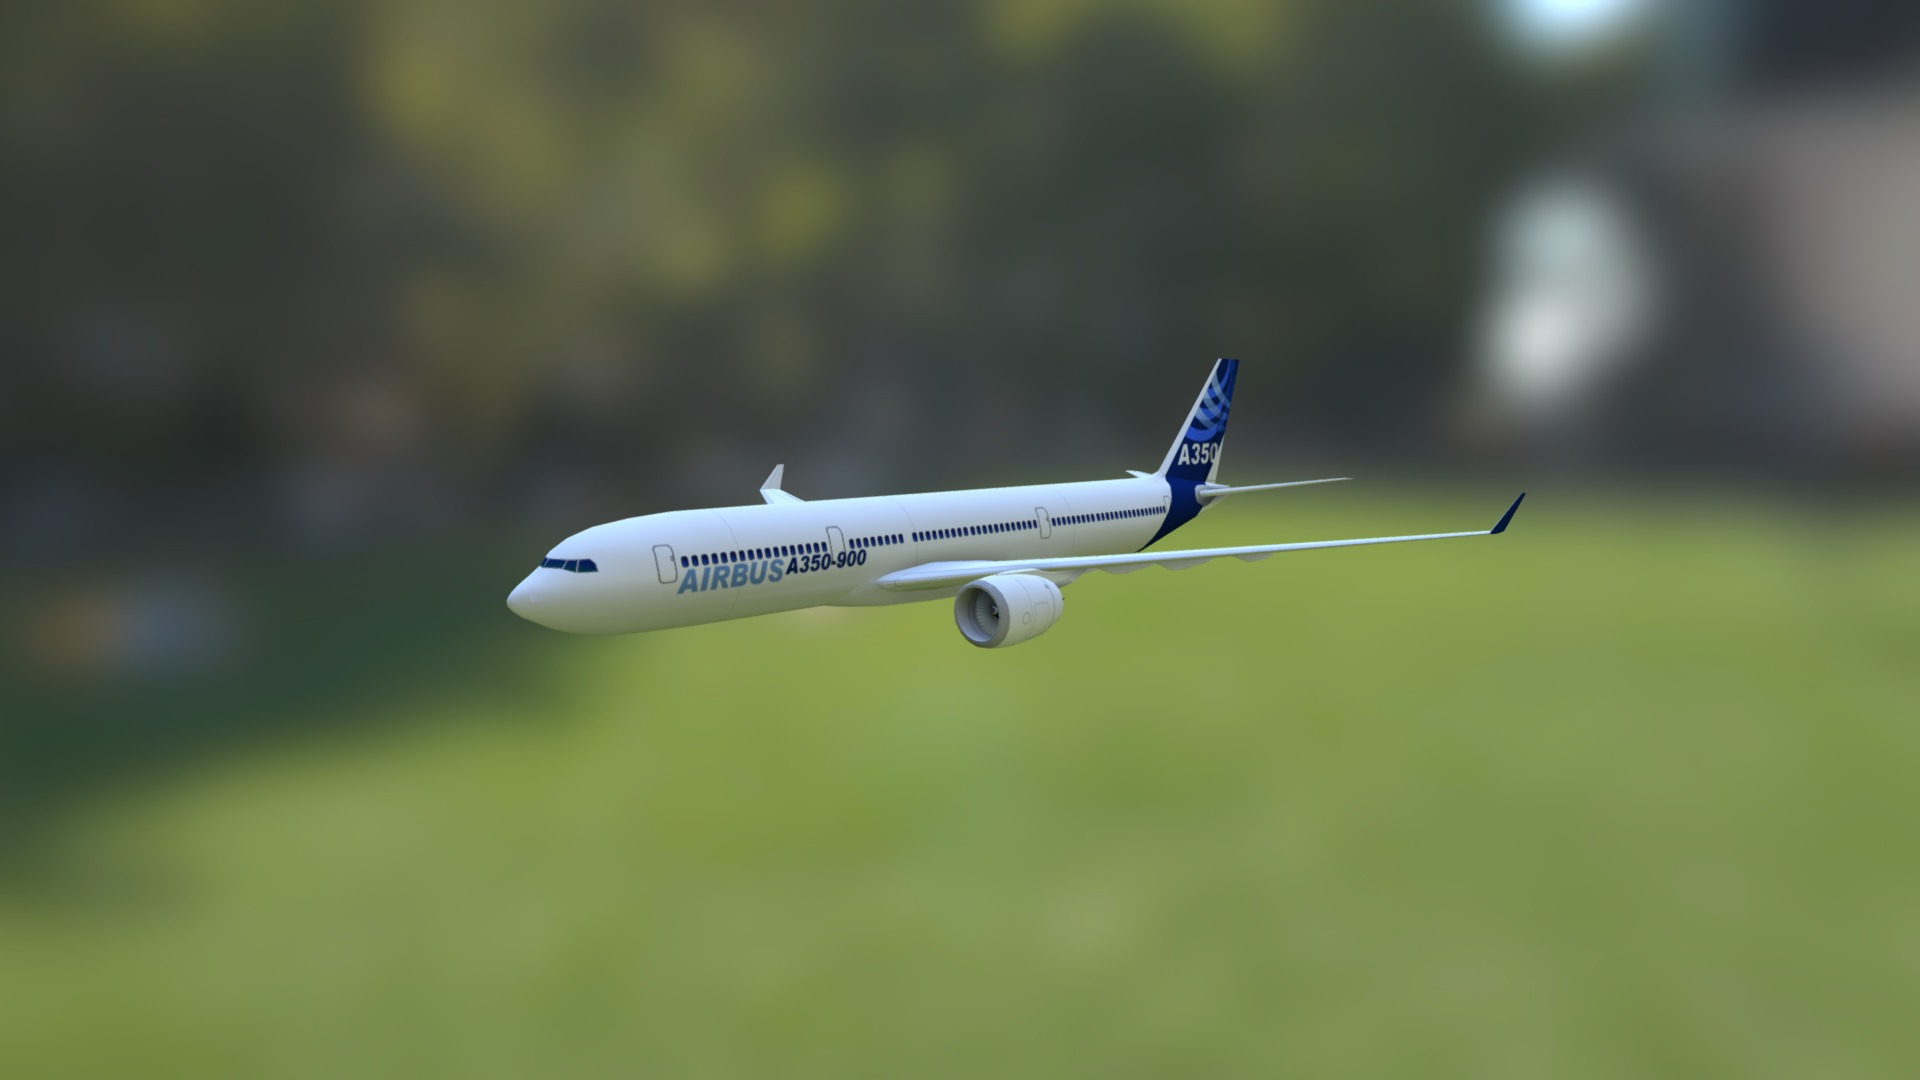 3D model Airbus A350-900 - This is a 3D model of the Airbus A350-900. The 3D model is about a white airplane flying in the sky.